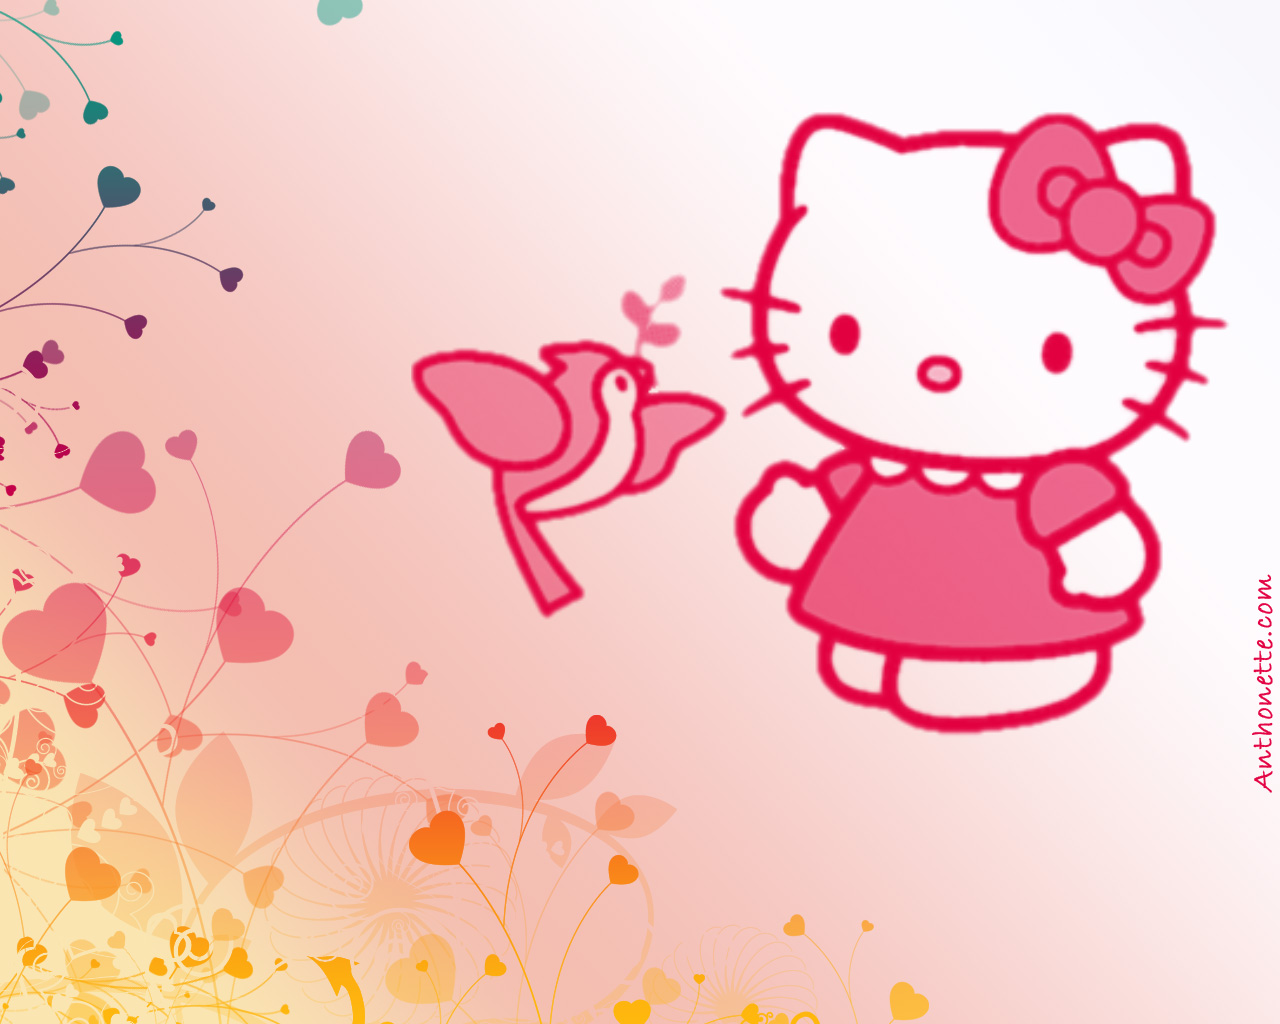 Hello Kitty Wallpapers Pink Hello Kitty Wallpaper Collection